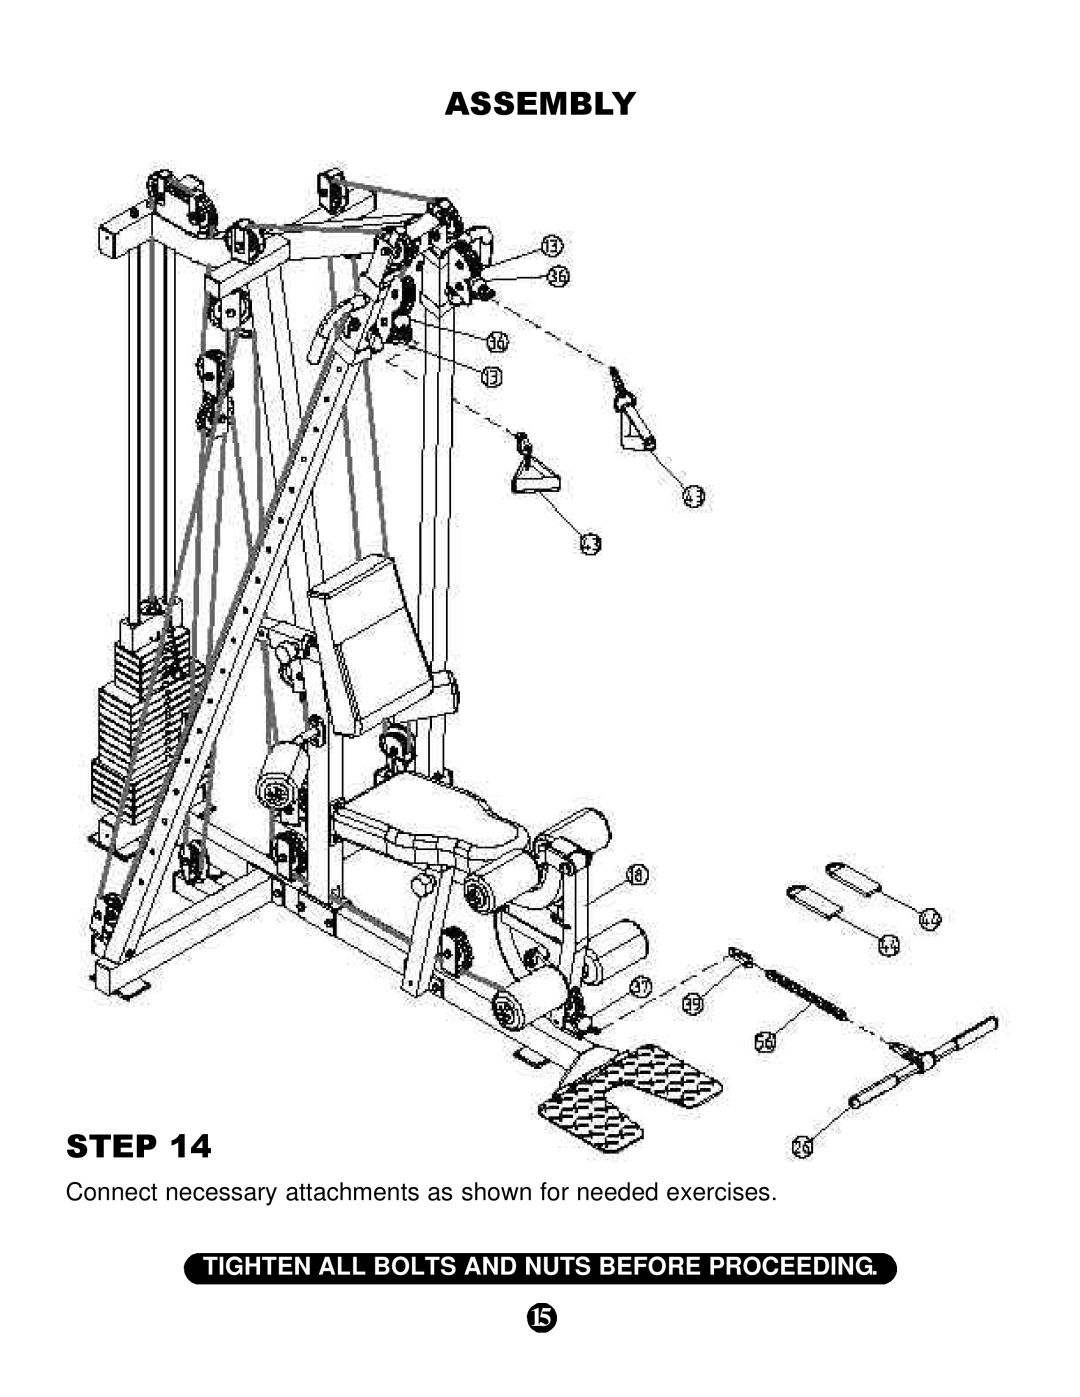 Keys Fitness KPS-CG owner manual Assembly Step, Connect necessary attachments as shown for needed exercises 